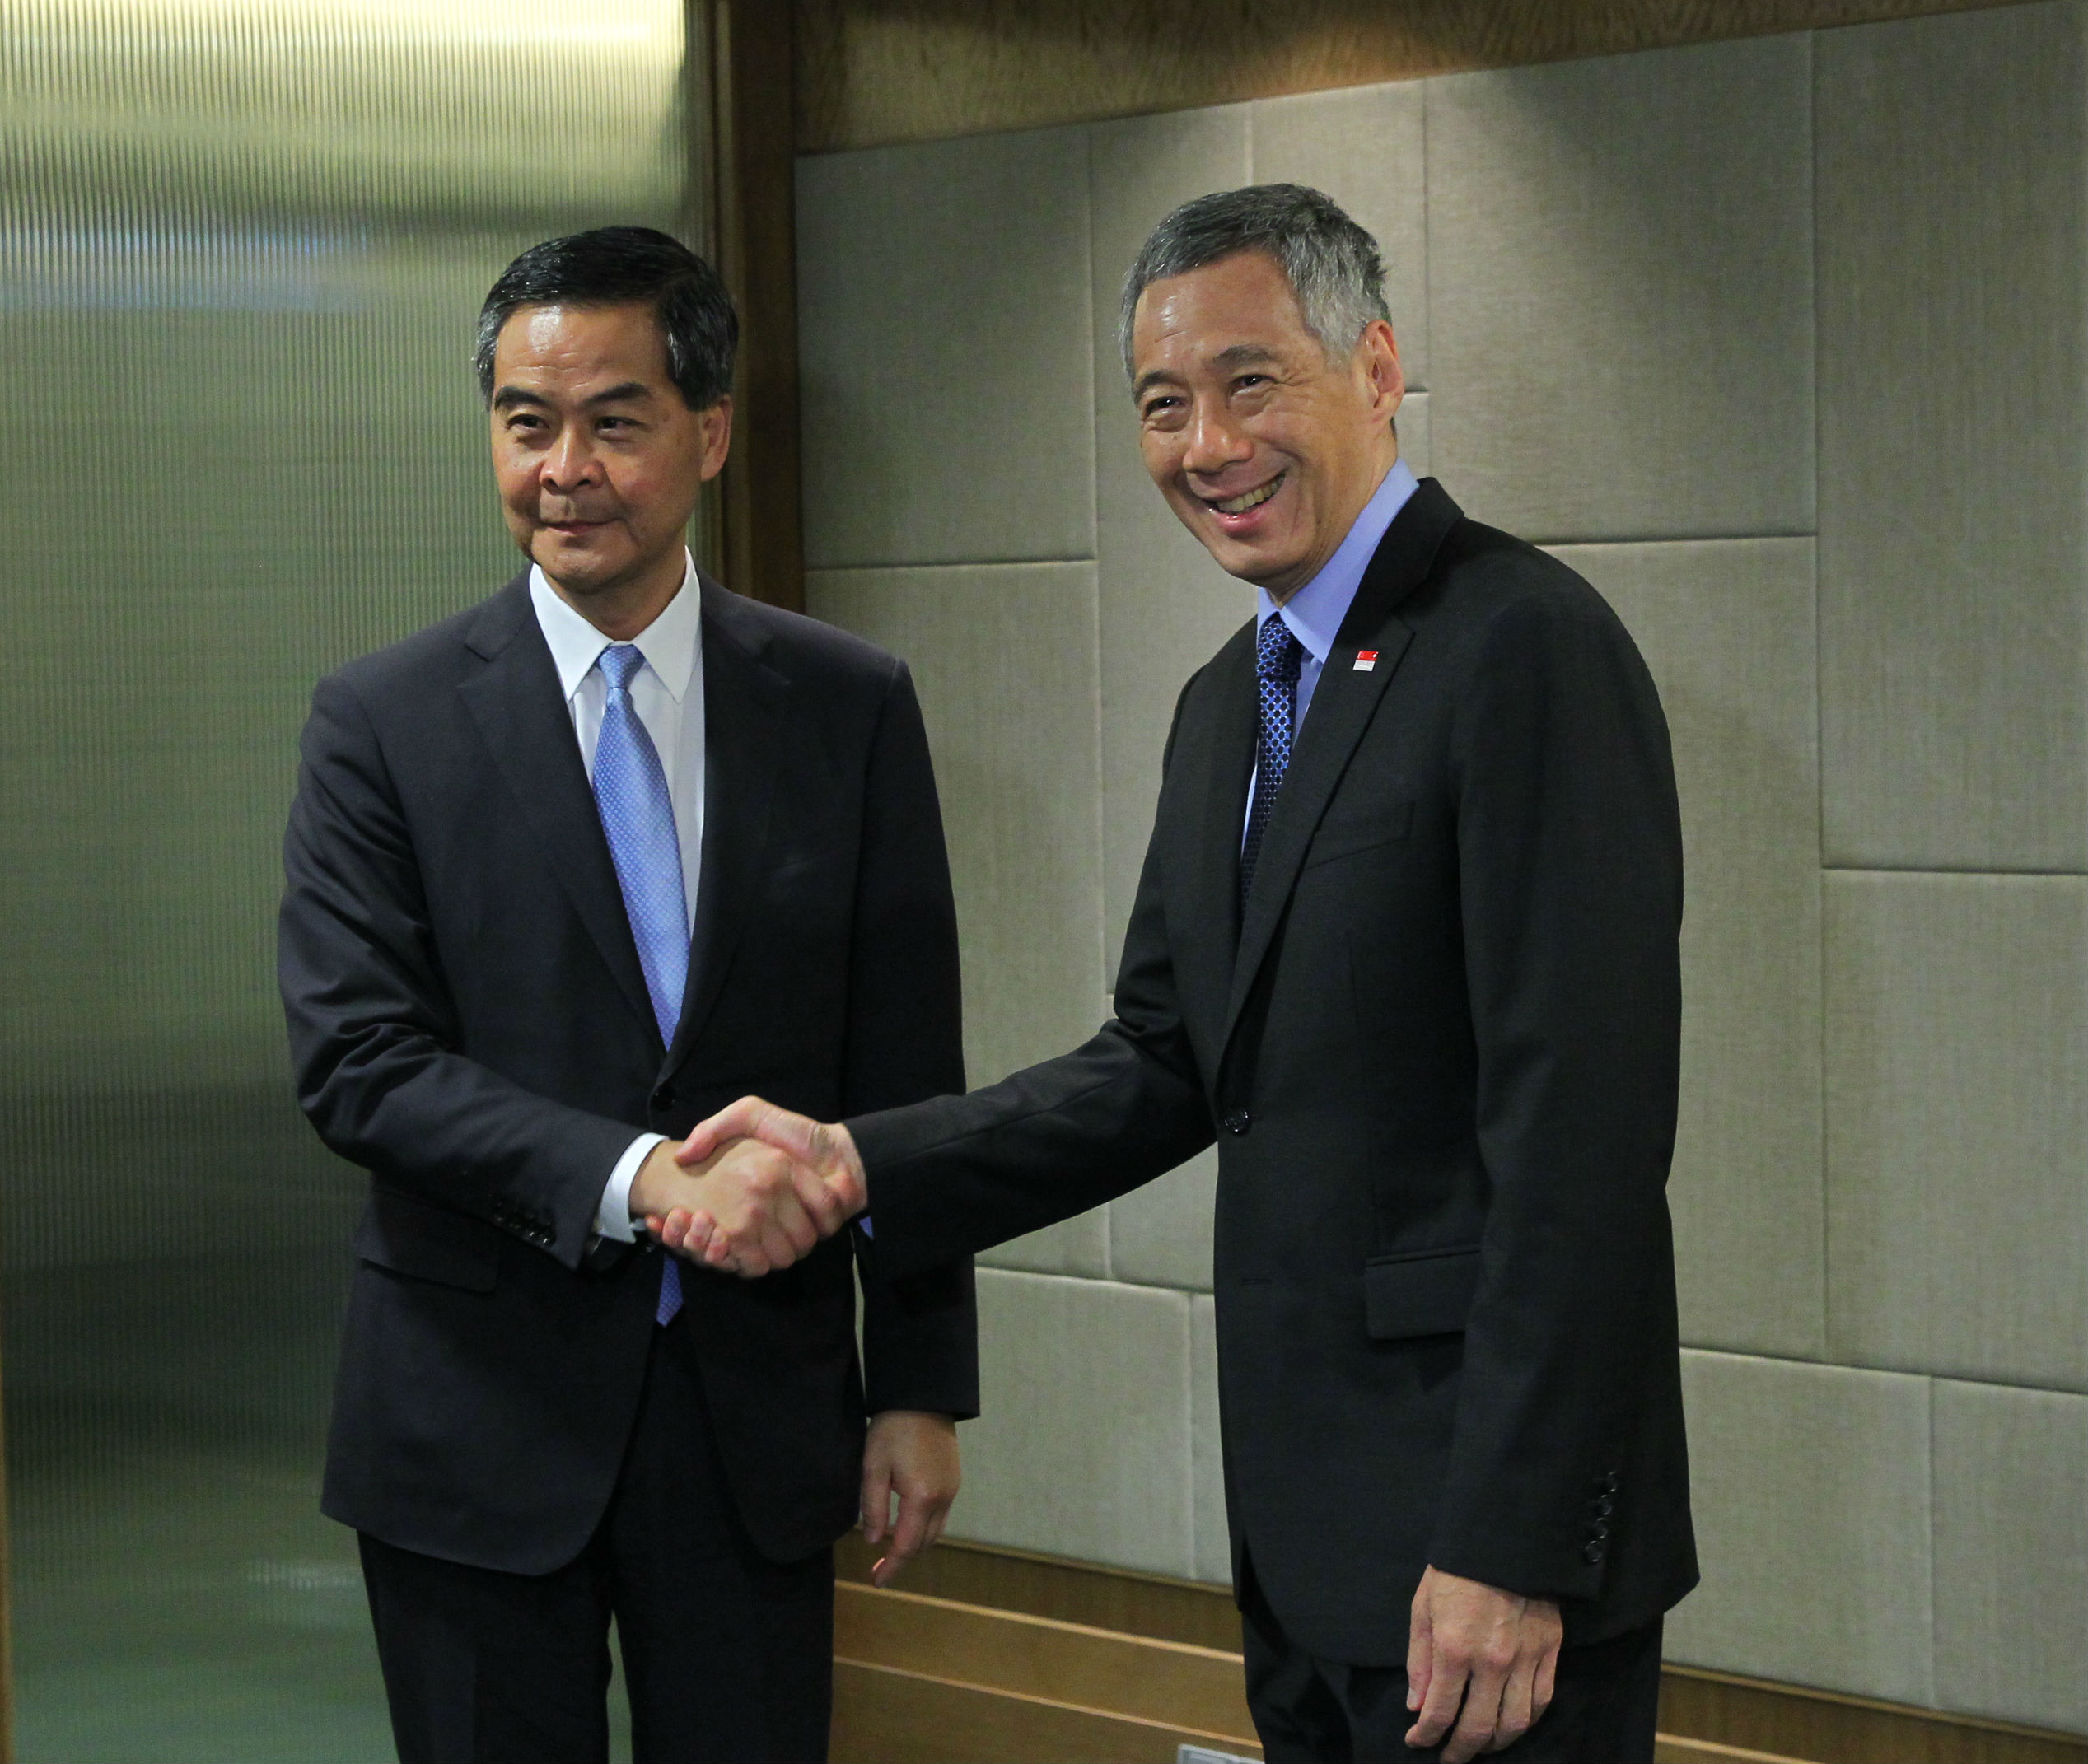 Meeting with HKSAR CE CY Leung on 26 Apr 2015 (MCI Photo by Kenji Soon)